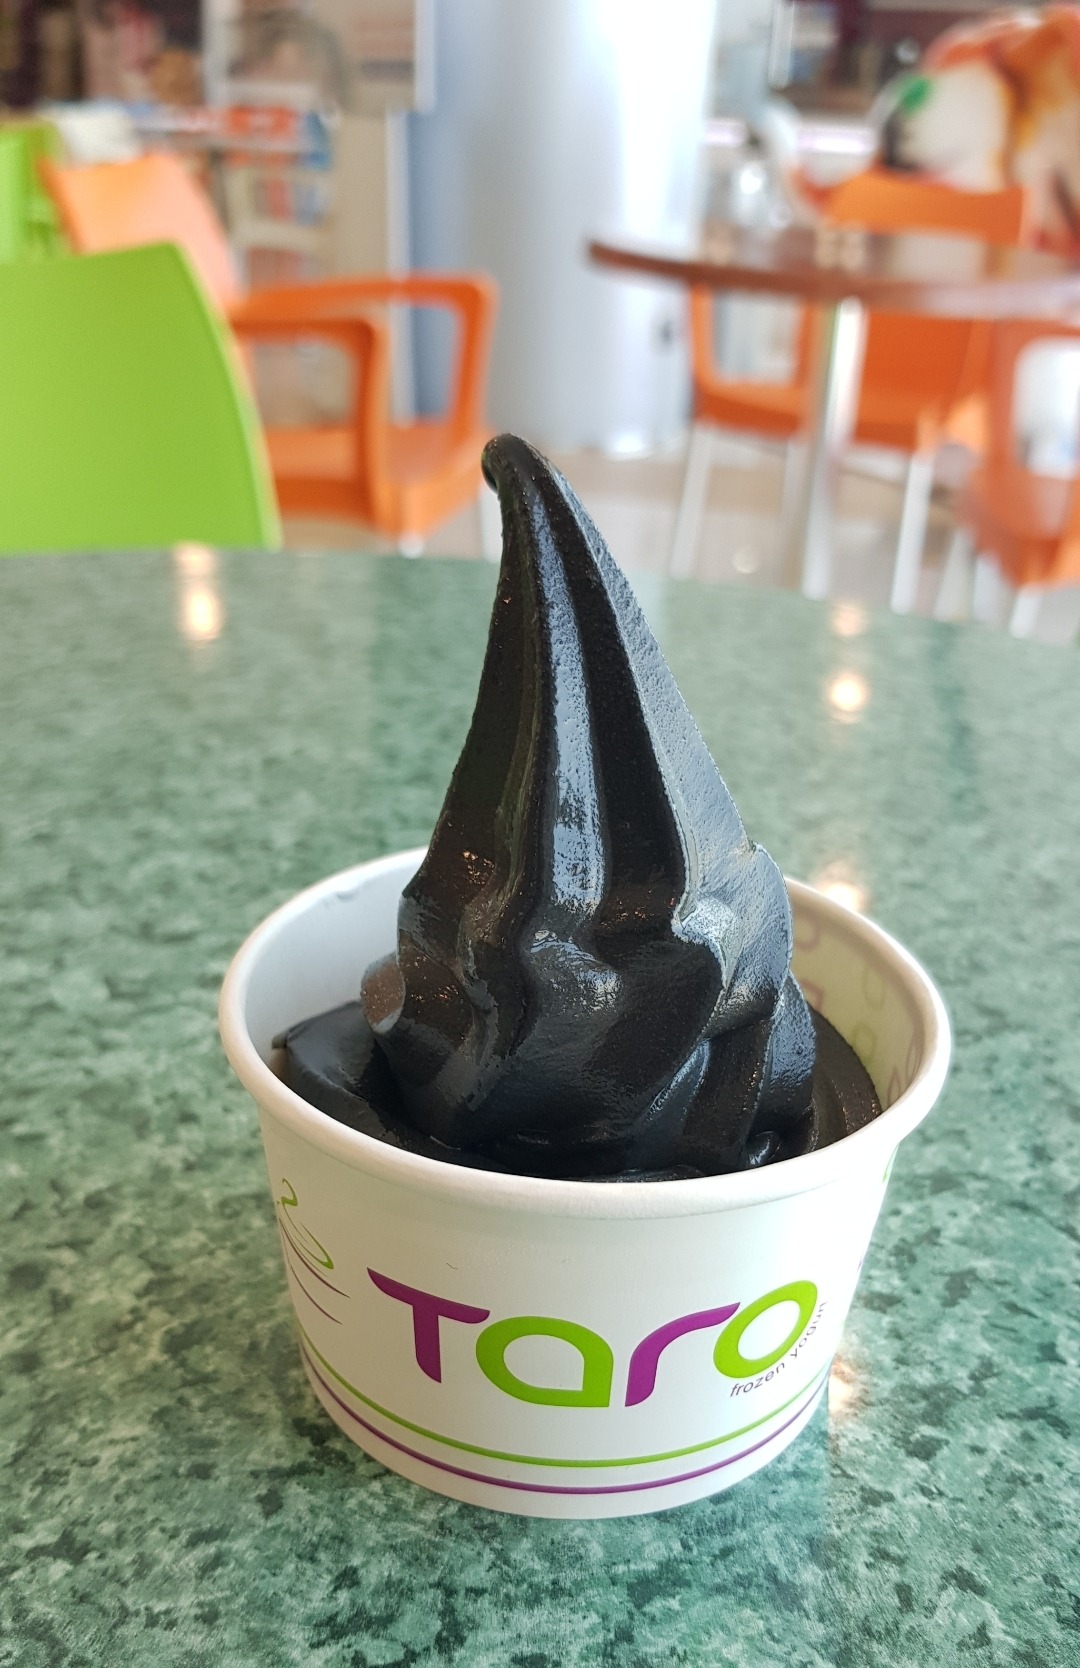 (coconut and some vegetables) charcoal #icecream 
I don't recommend it 🙄 @ Taro Frozen Yogurt - Bahrain